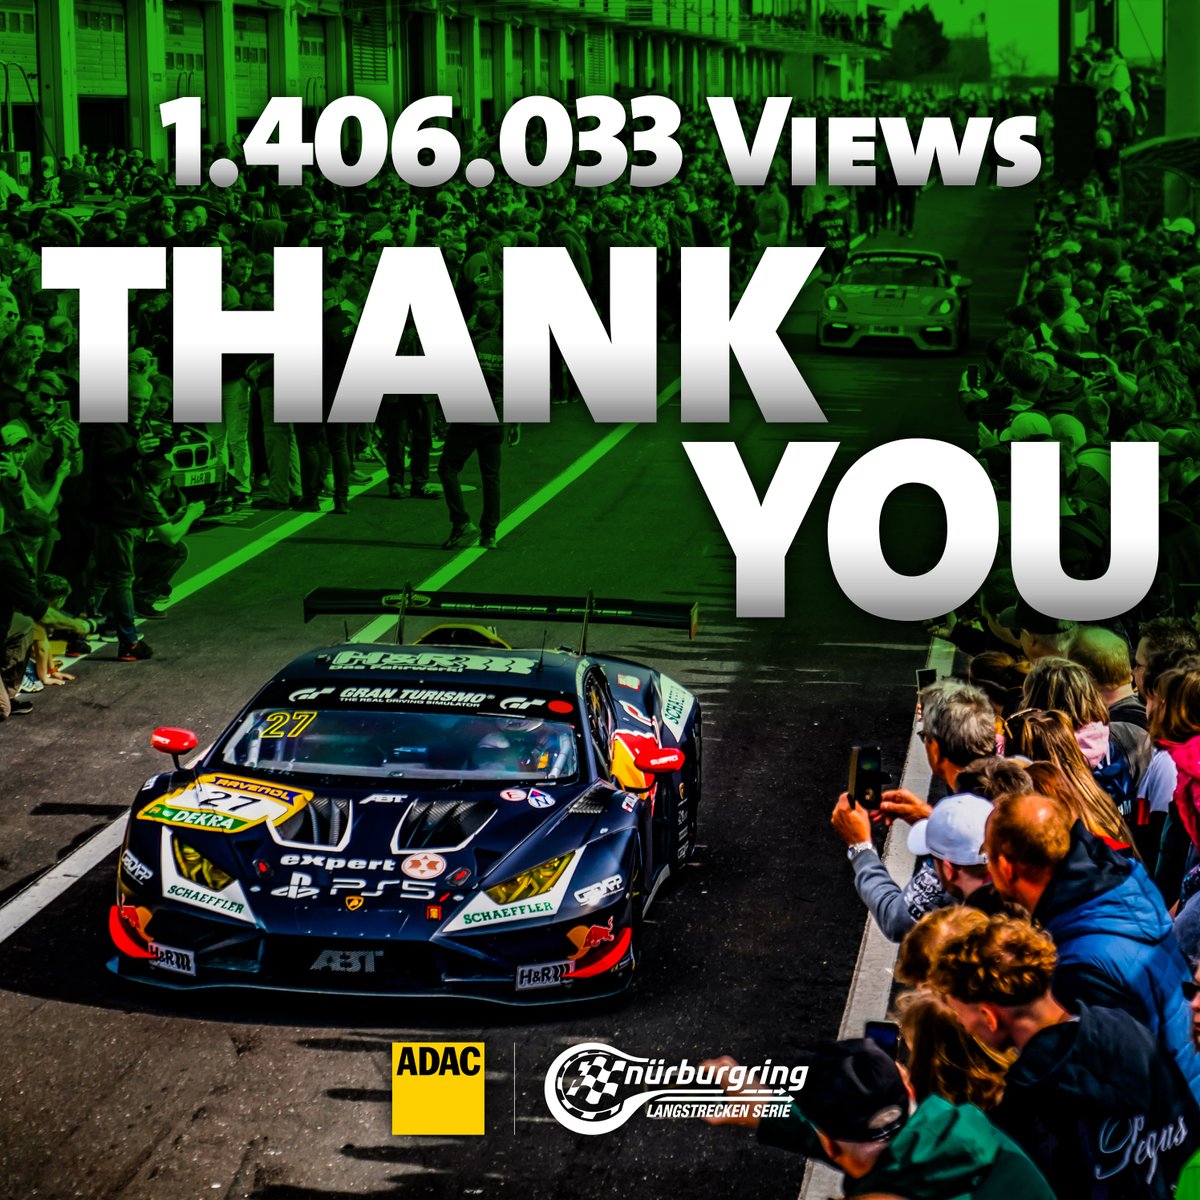 We achieved record numbers together with you at the NLS kick-off. 😳 The livestreams of the double header on 6 and 7 April achieved a total of 1,406,033 views! 💥 Thank you to every single one of you! ___ #NLS #Nürburgring #Nordschleife #myraceisfairplay #dasoriginal